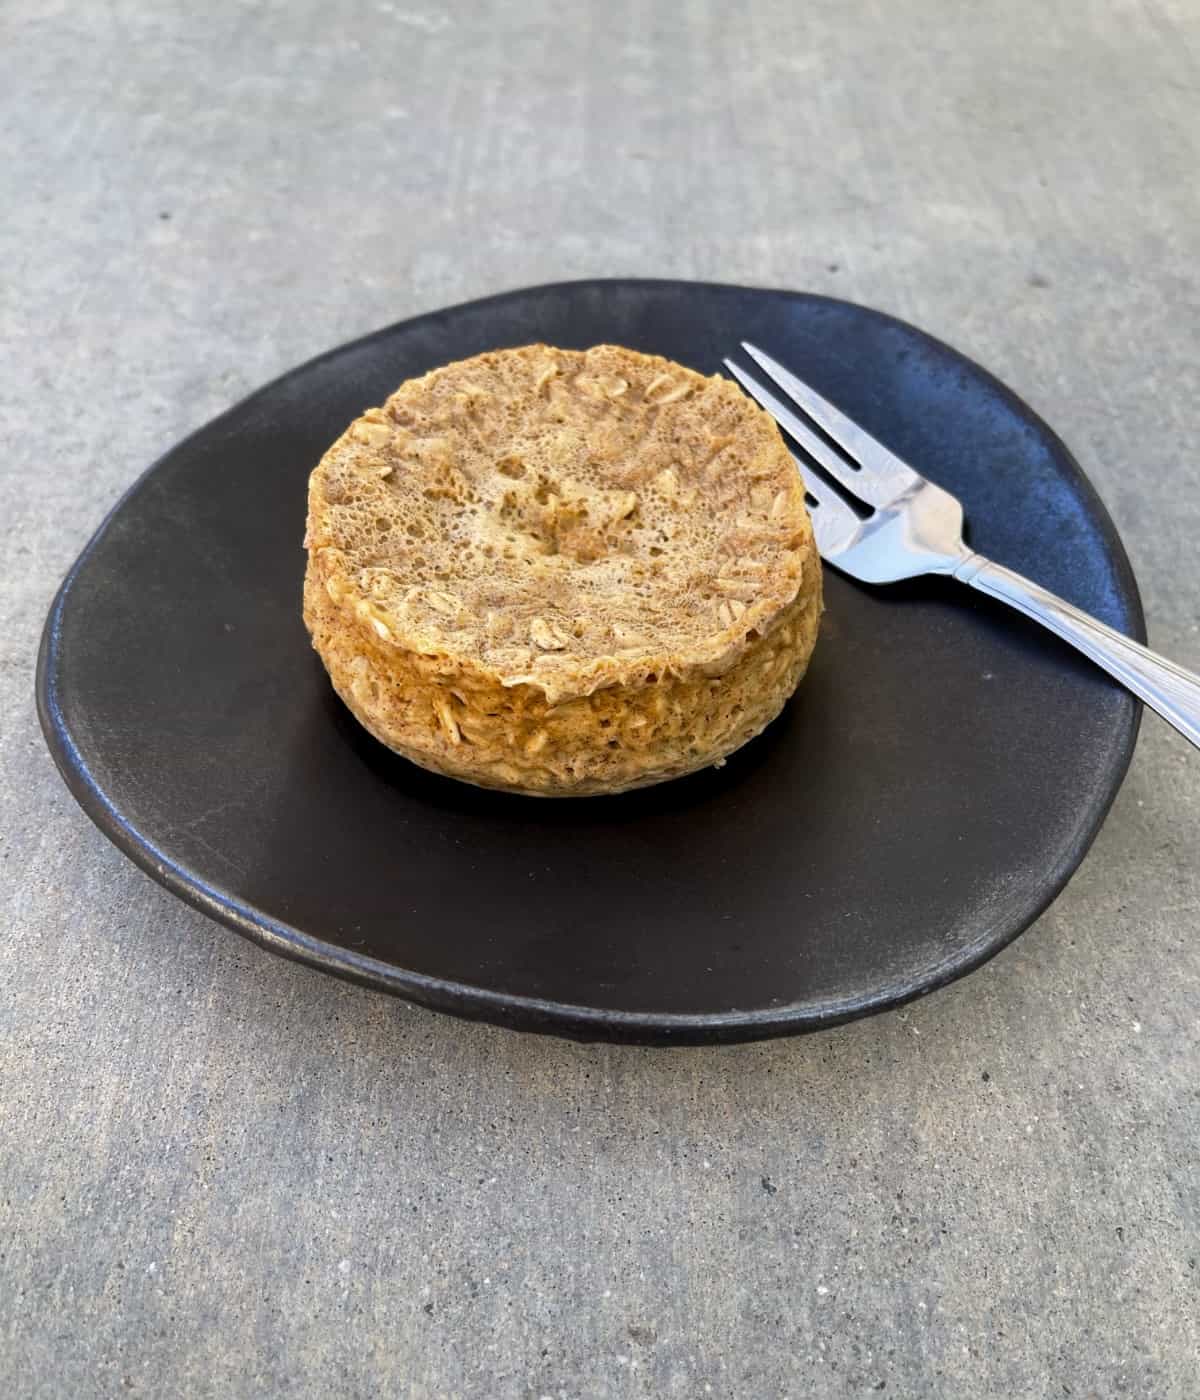 Oatmeal raisin mug muffin on a brown pottery plate with fork.